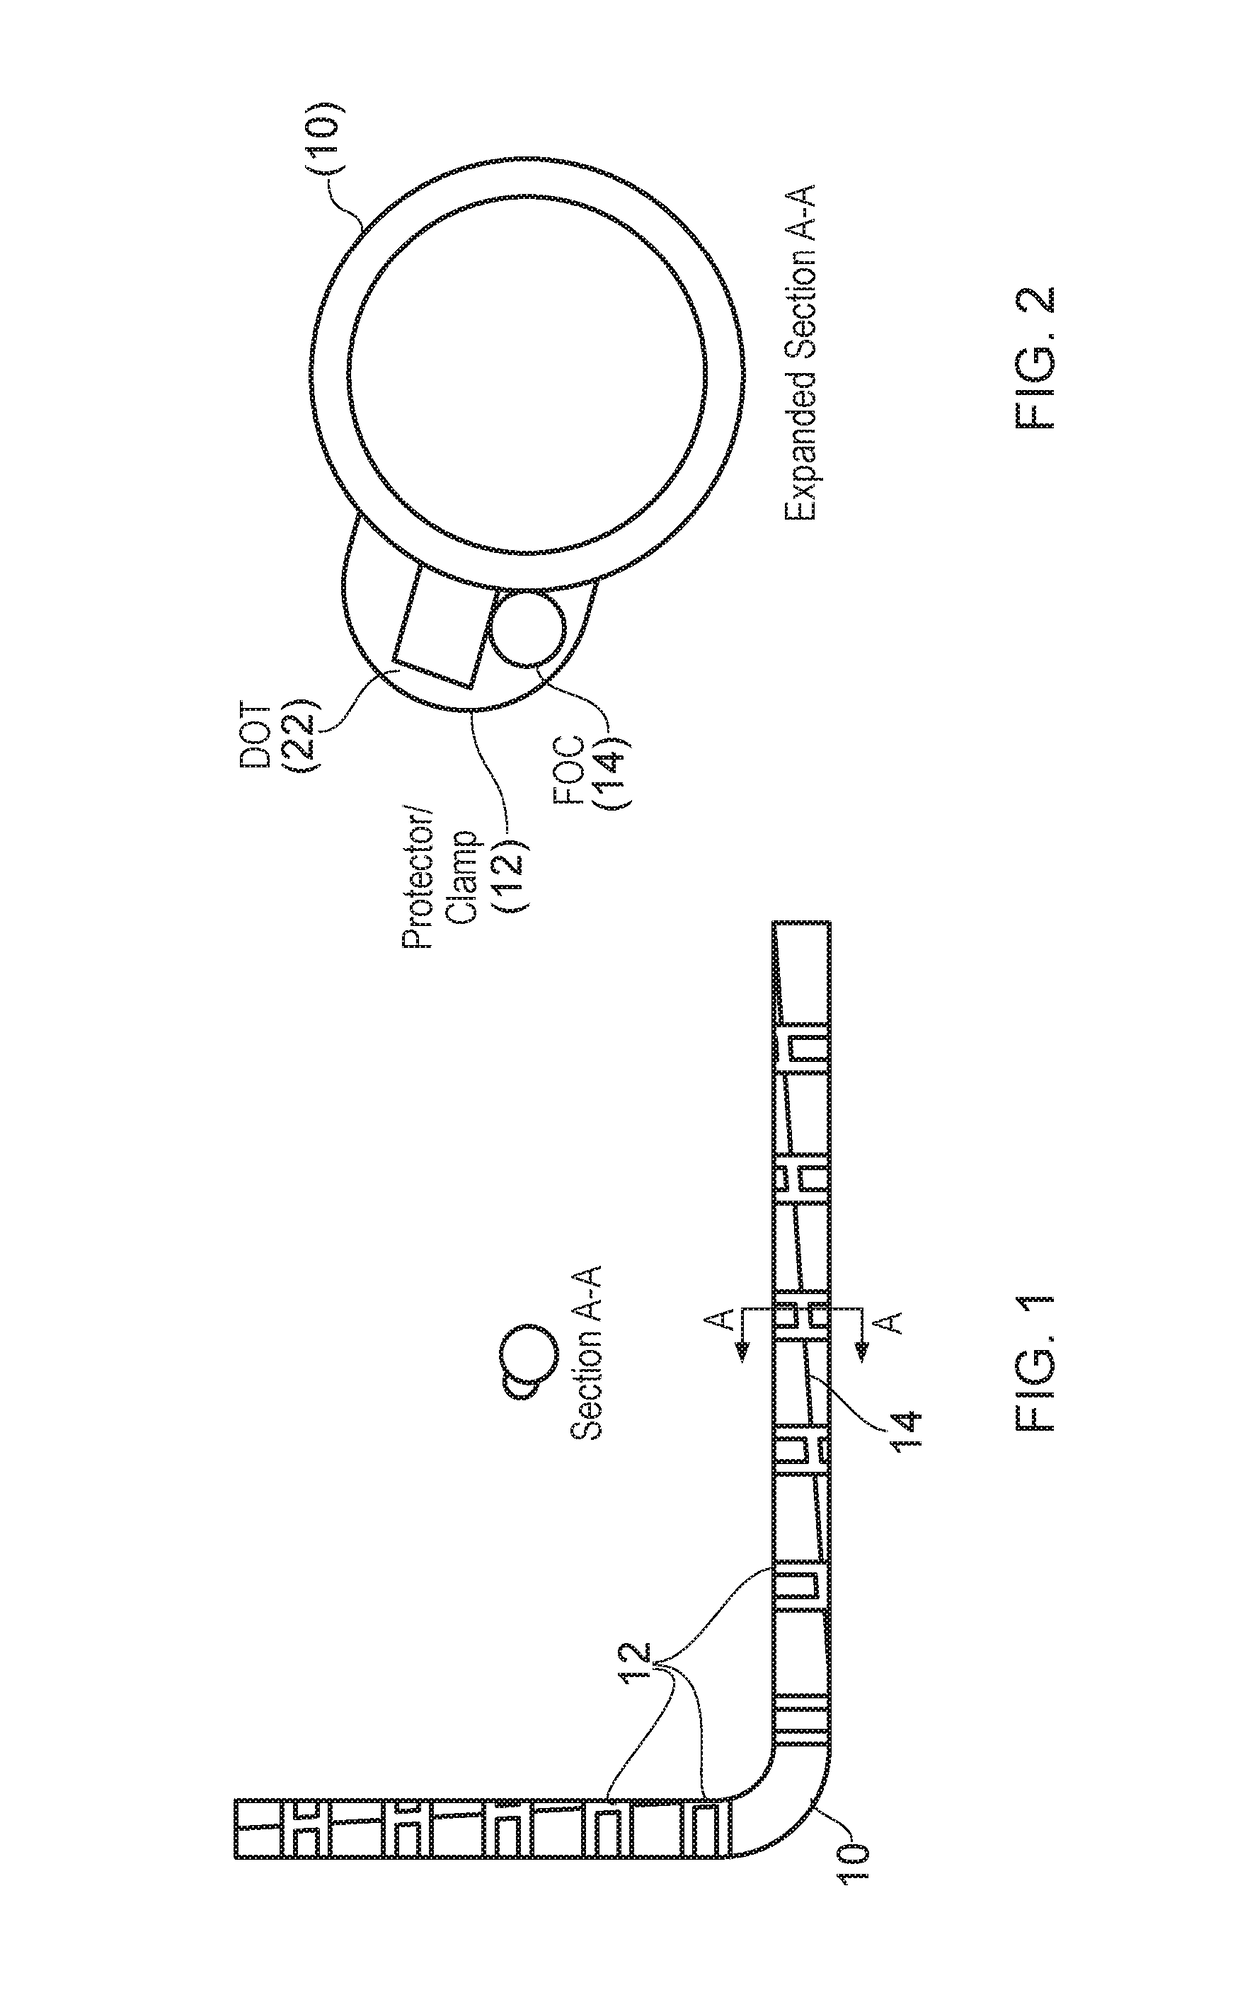 Method and system for downhole object location and orientation determination